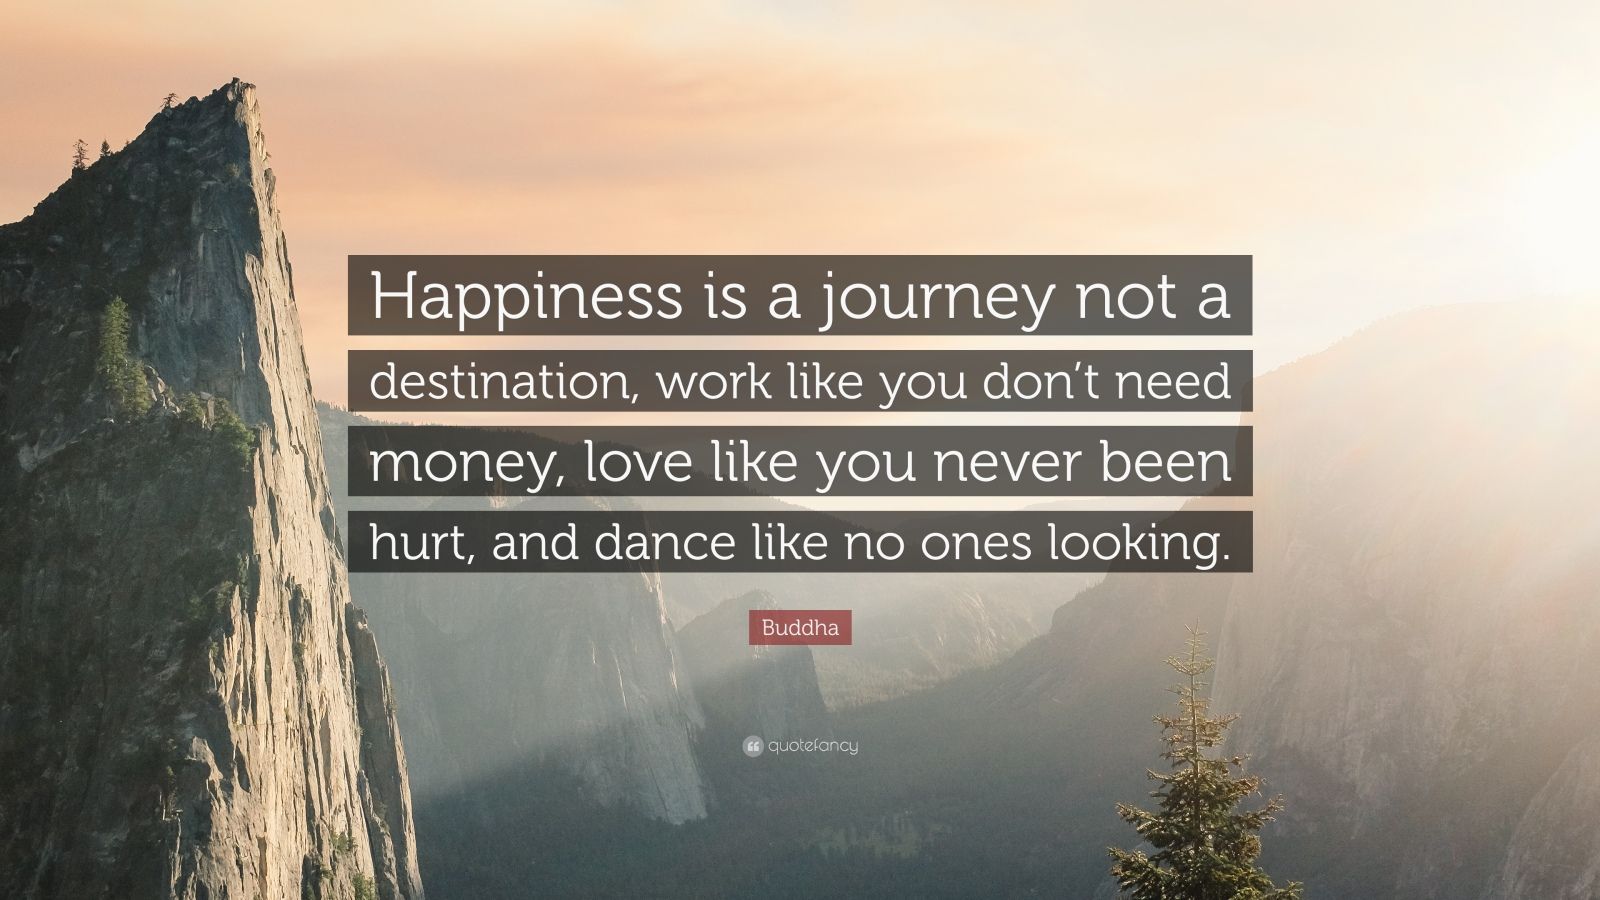 Buddha Quote: “Happiness is a journey not a destination, work like you